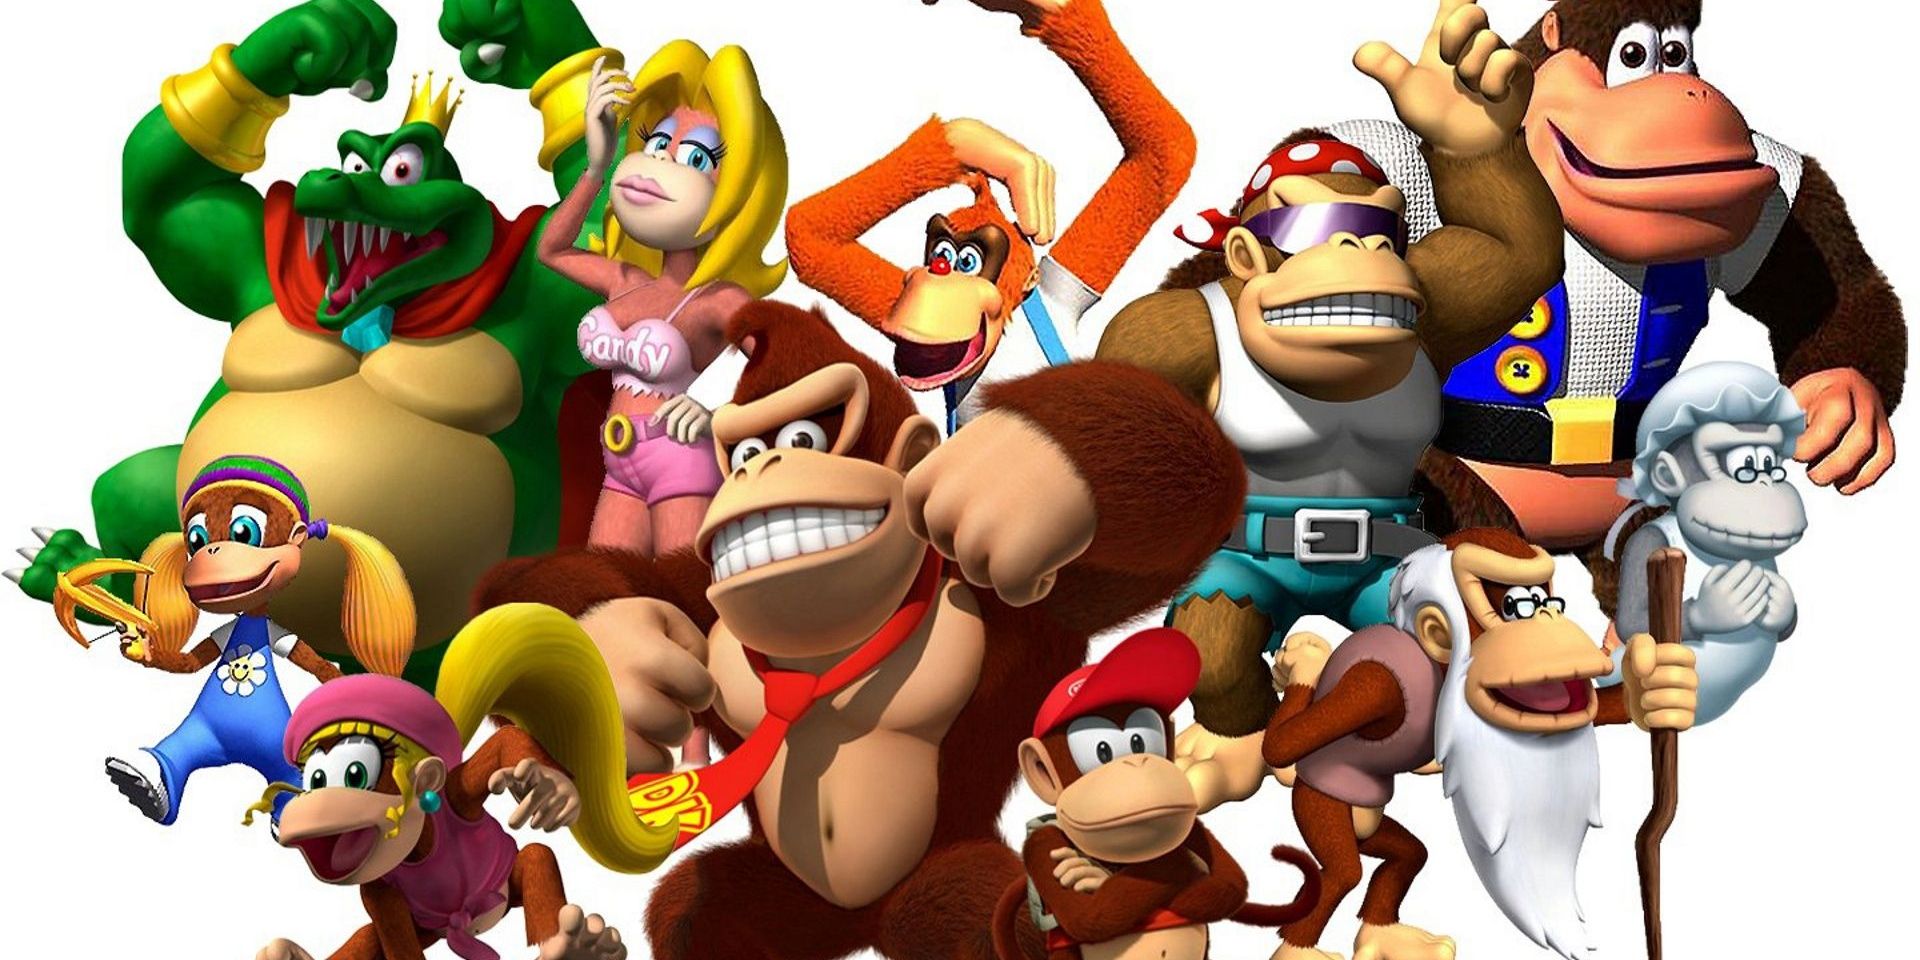 Donkey Kong's extended Kong family.